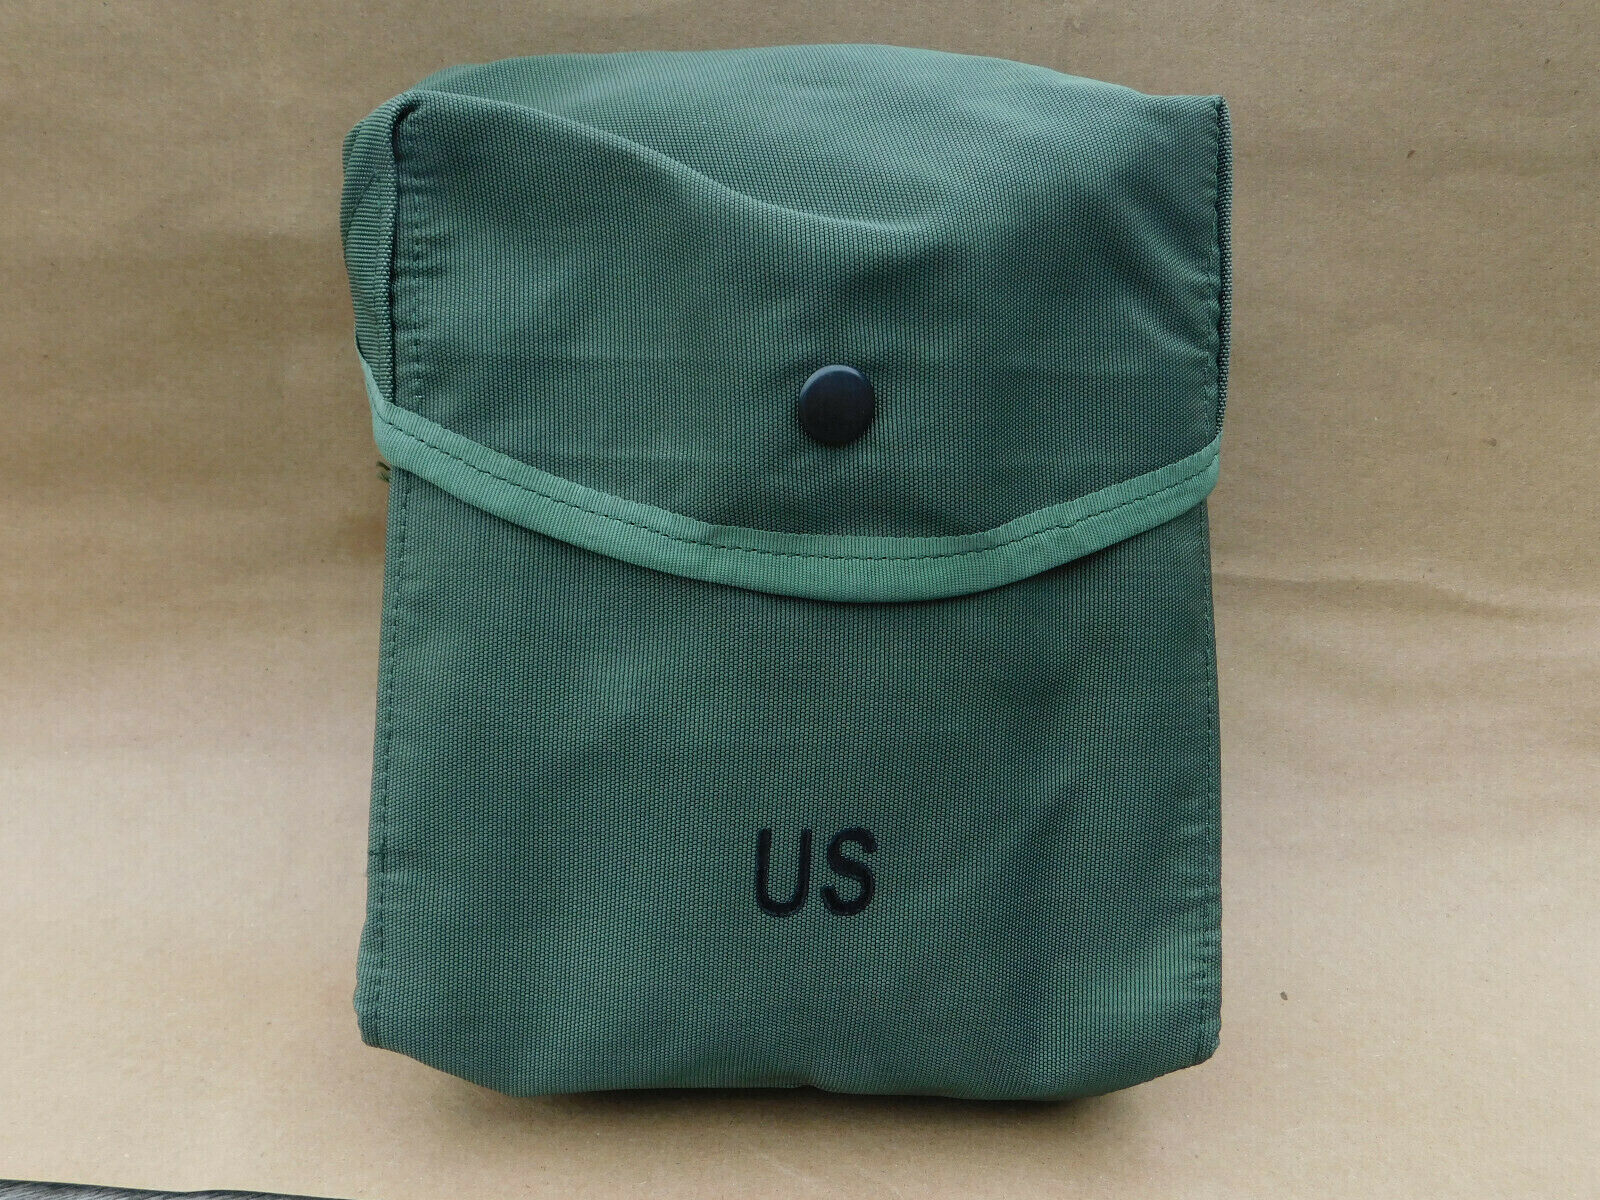 US MILITARY SAW Pouches - LC-1 Small Arms Ammo Cases - 2 PACK